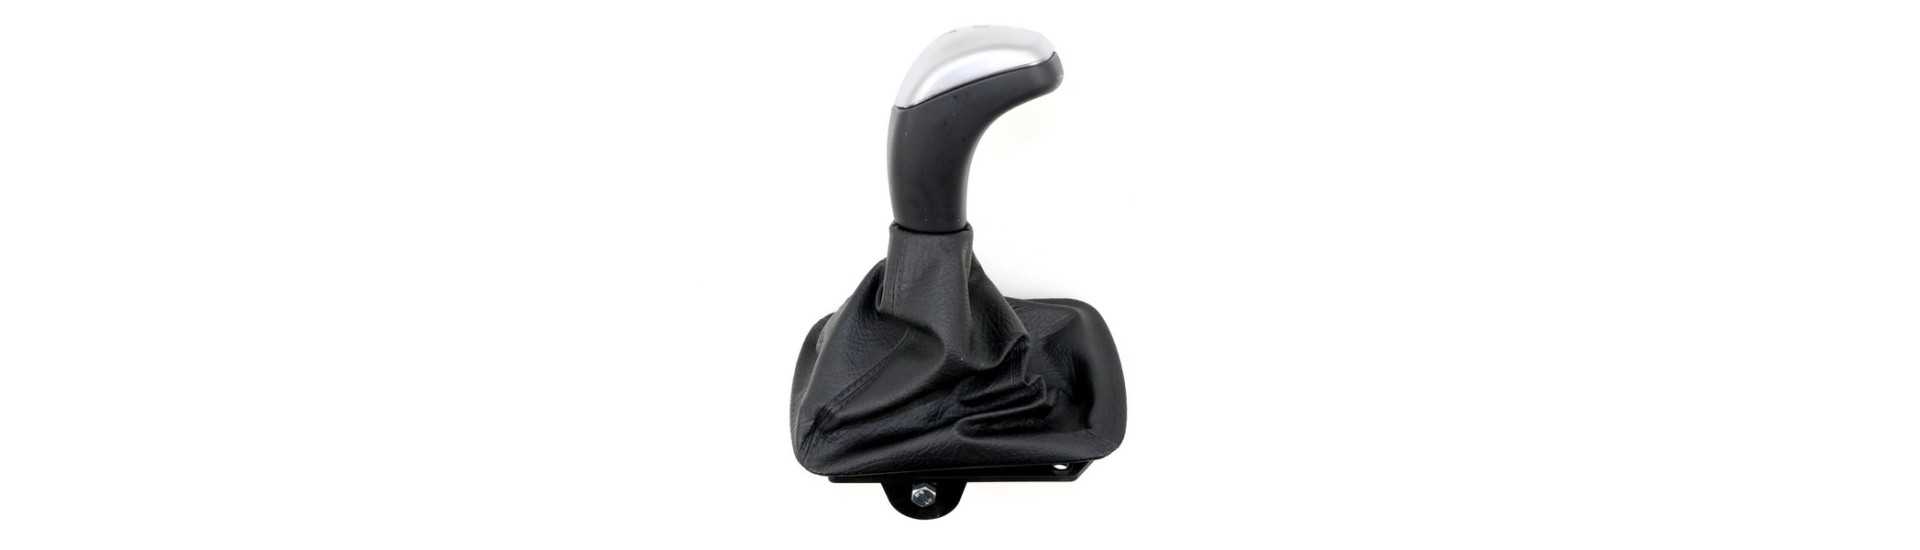 Gear lever at the best price for a car without a license